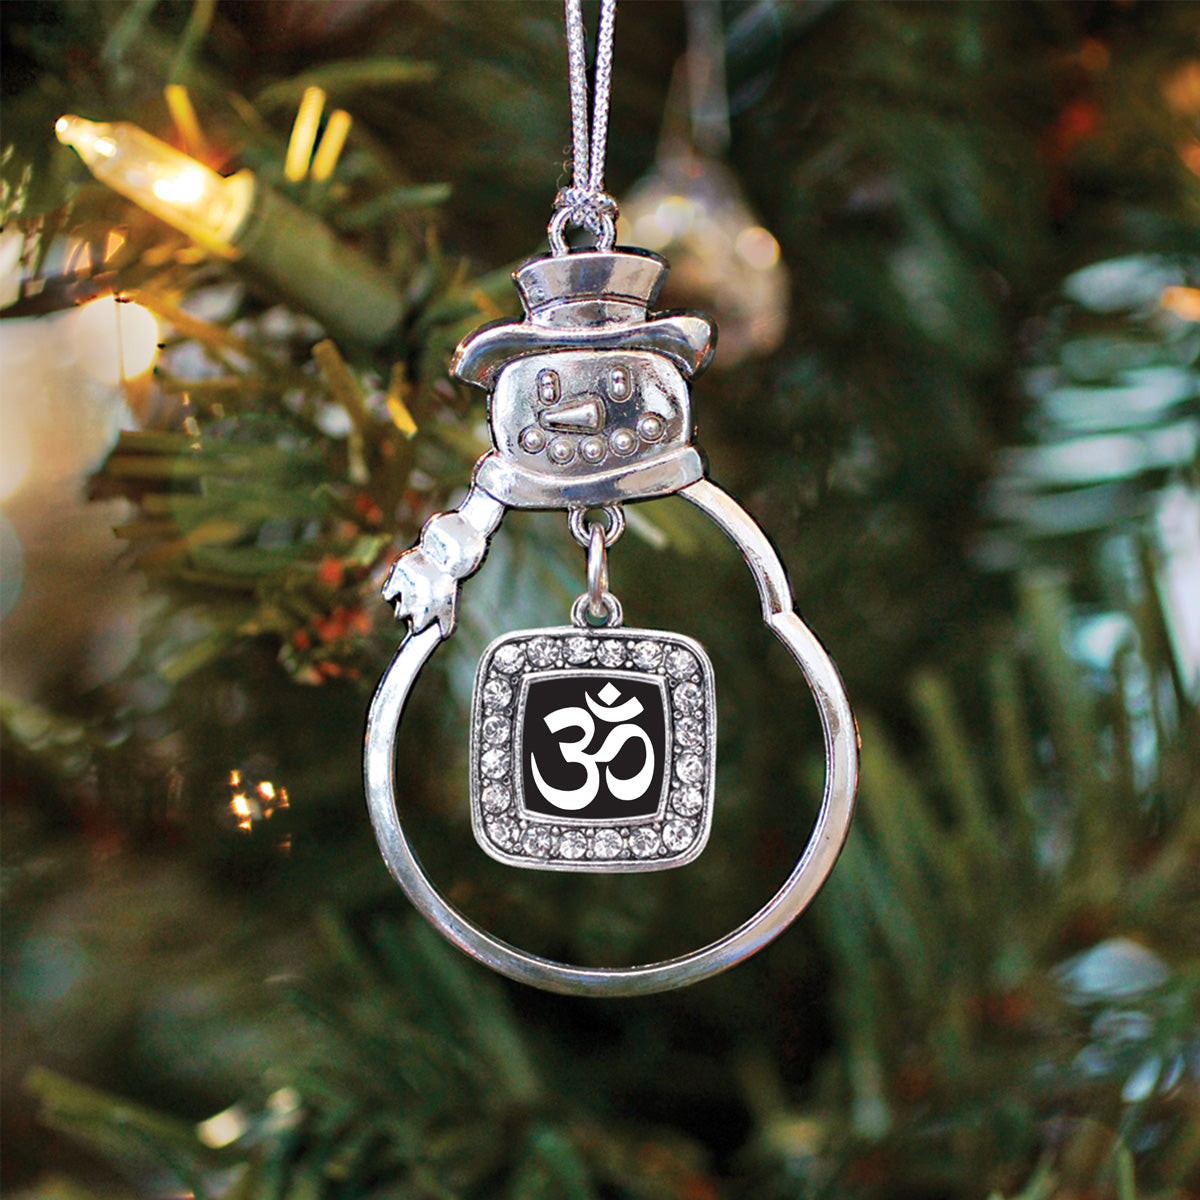 Black and Whit OM Yoga Square Charm Christmas / Holiday Ornament